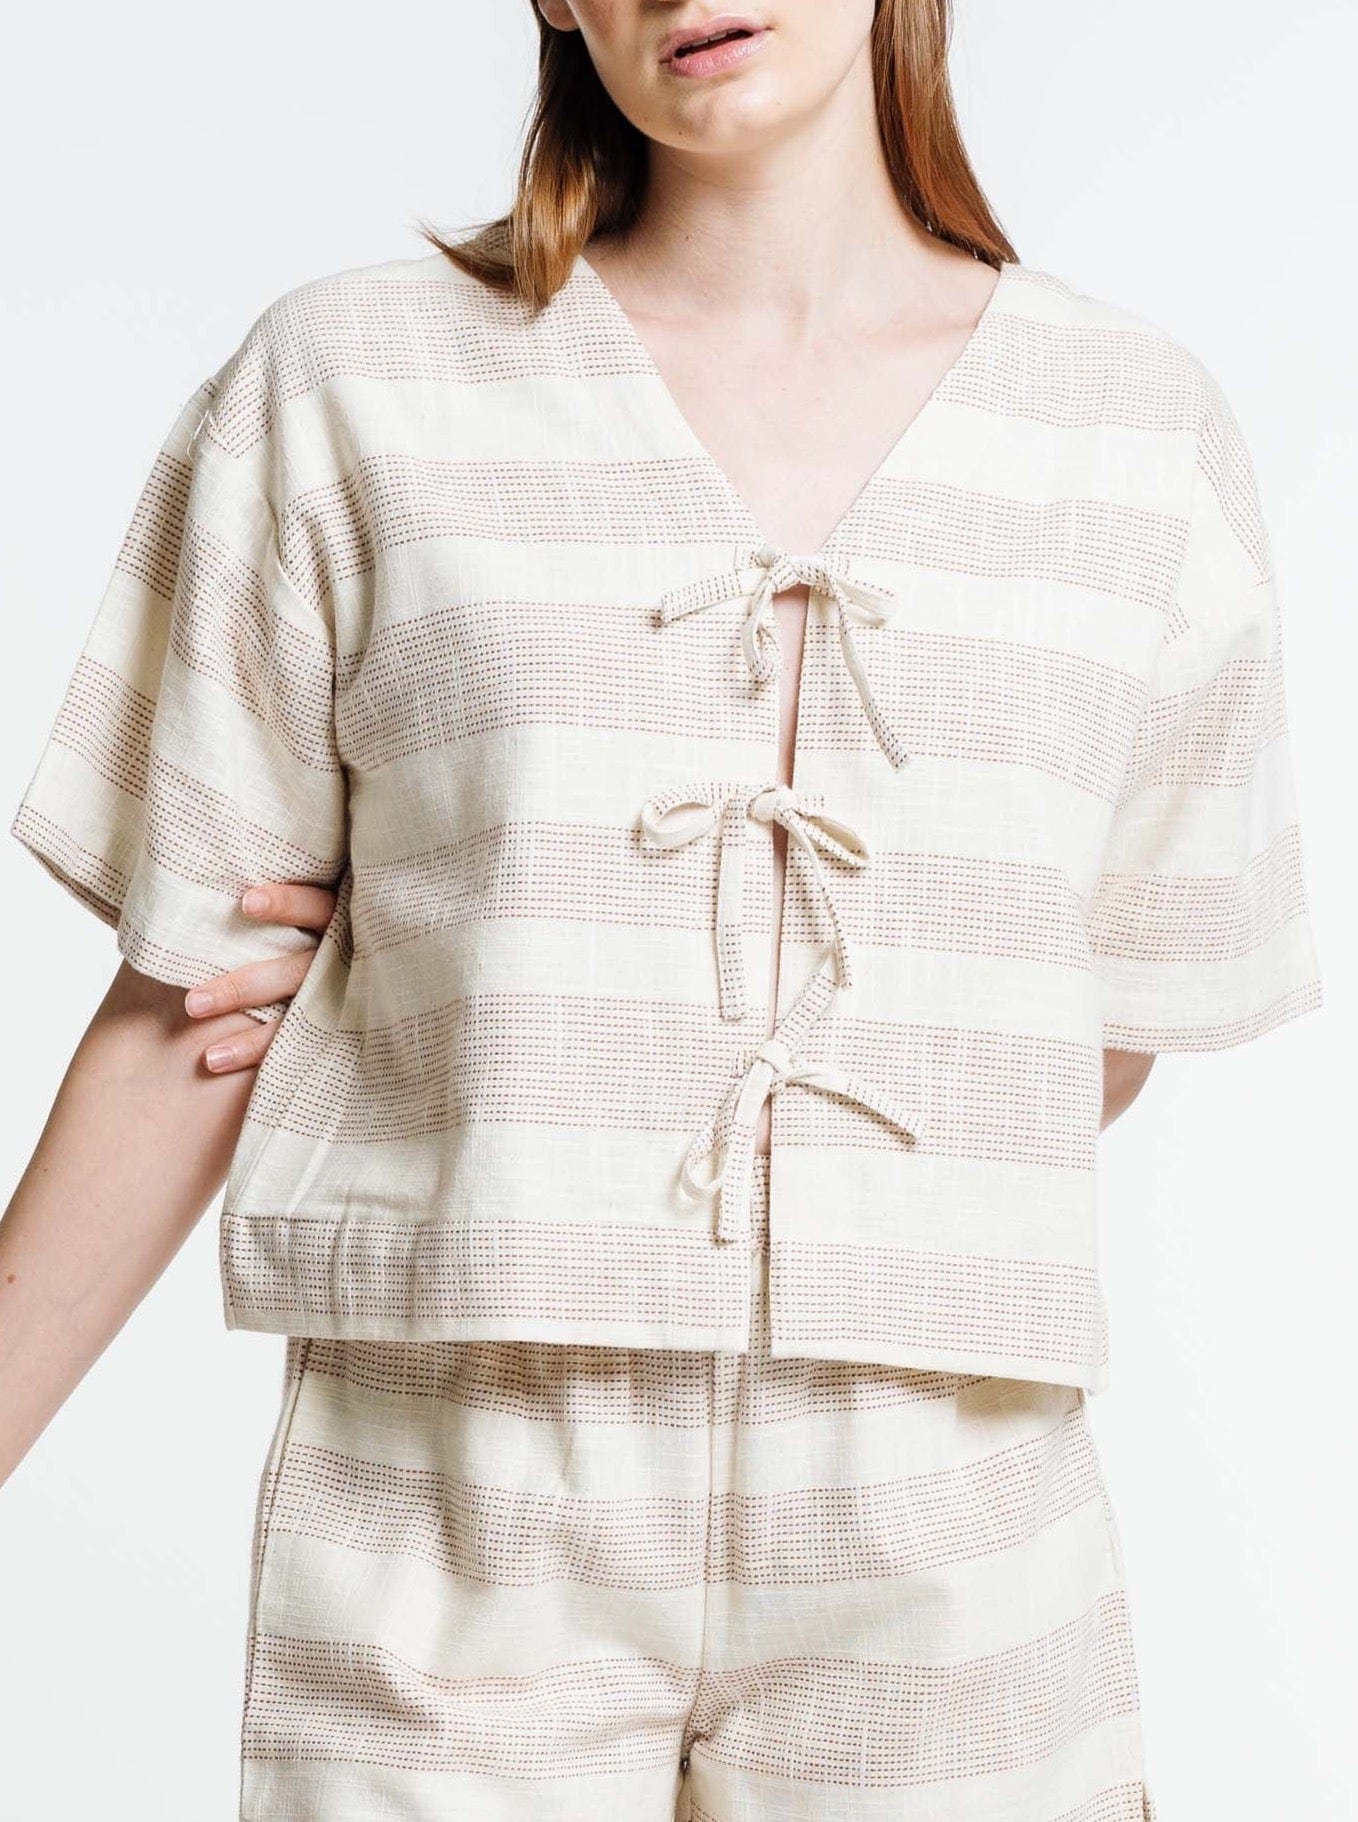 The model is wearing a Baker Top - Terracotta Ticking Stripe - Sample and shorts.